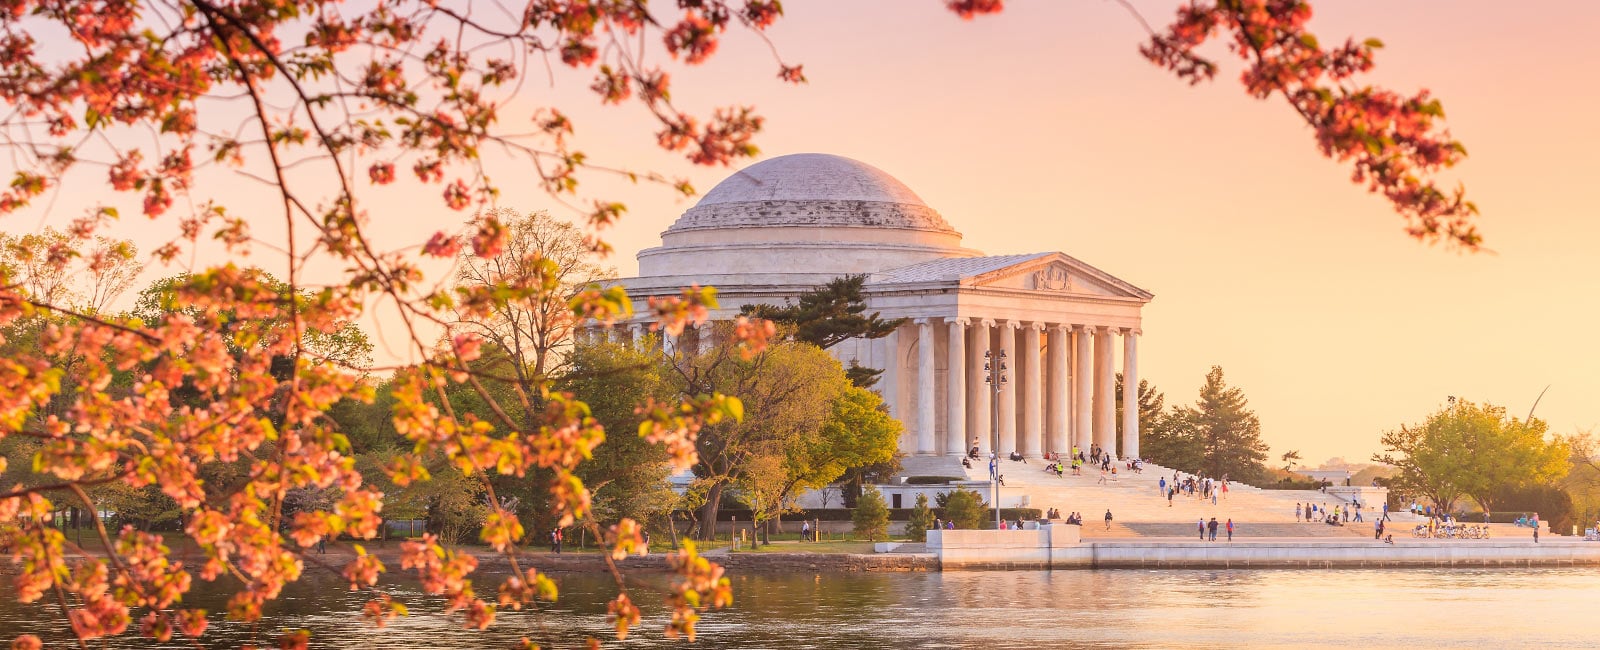 Enjoy A Vacation in Washington, D.C. with Hilton Grand Vacations